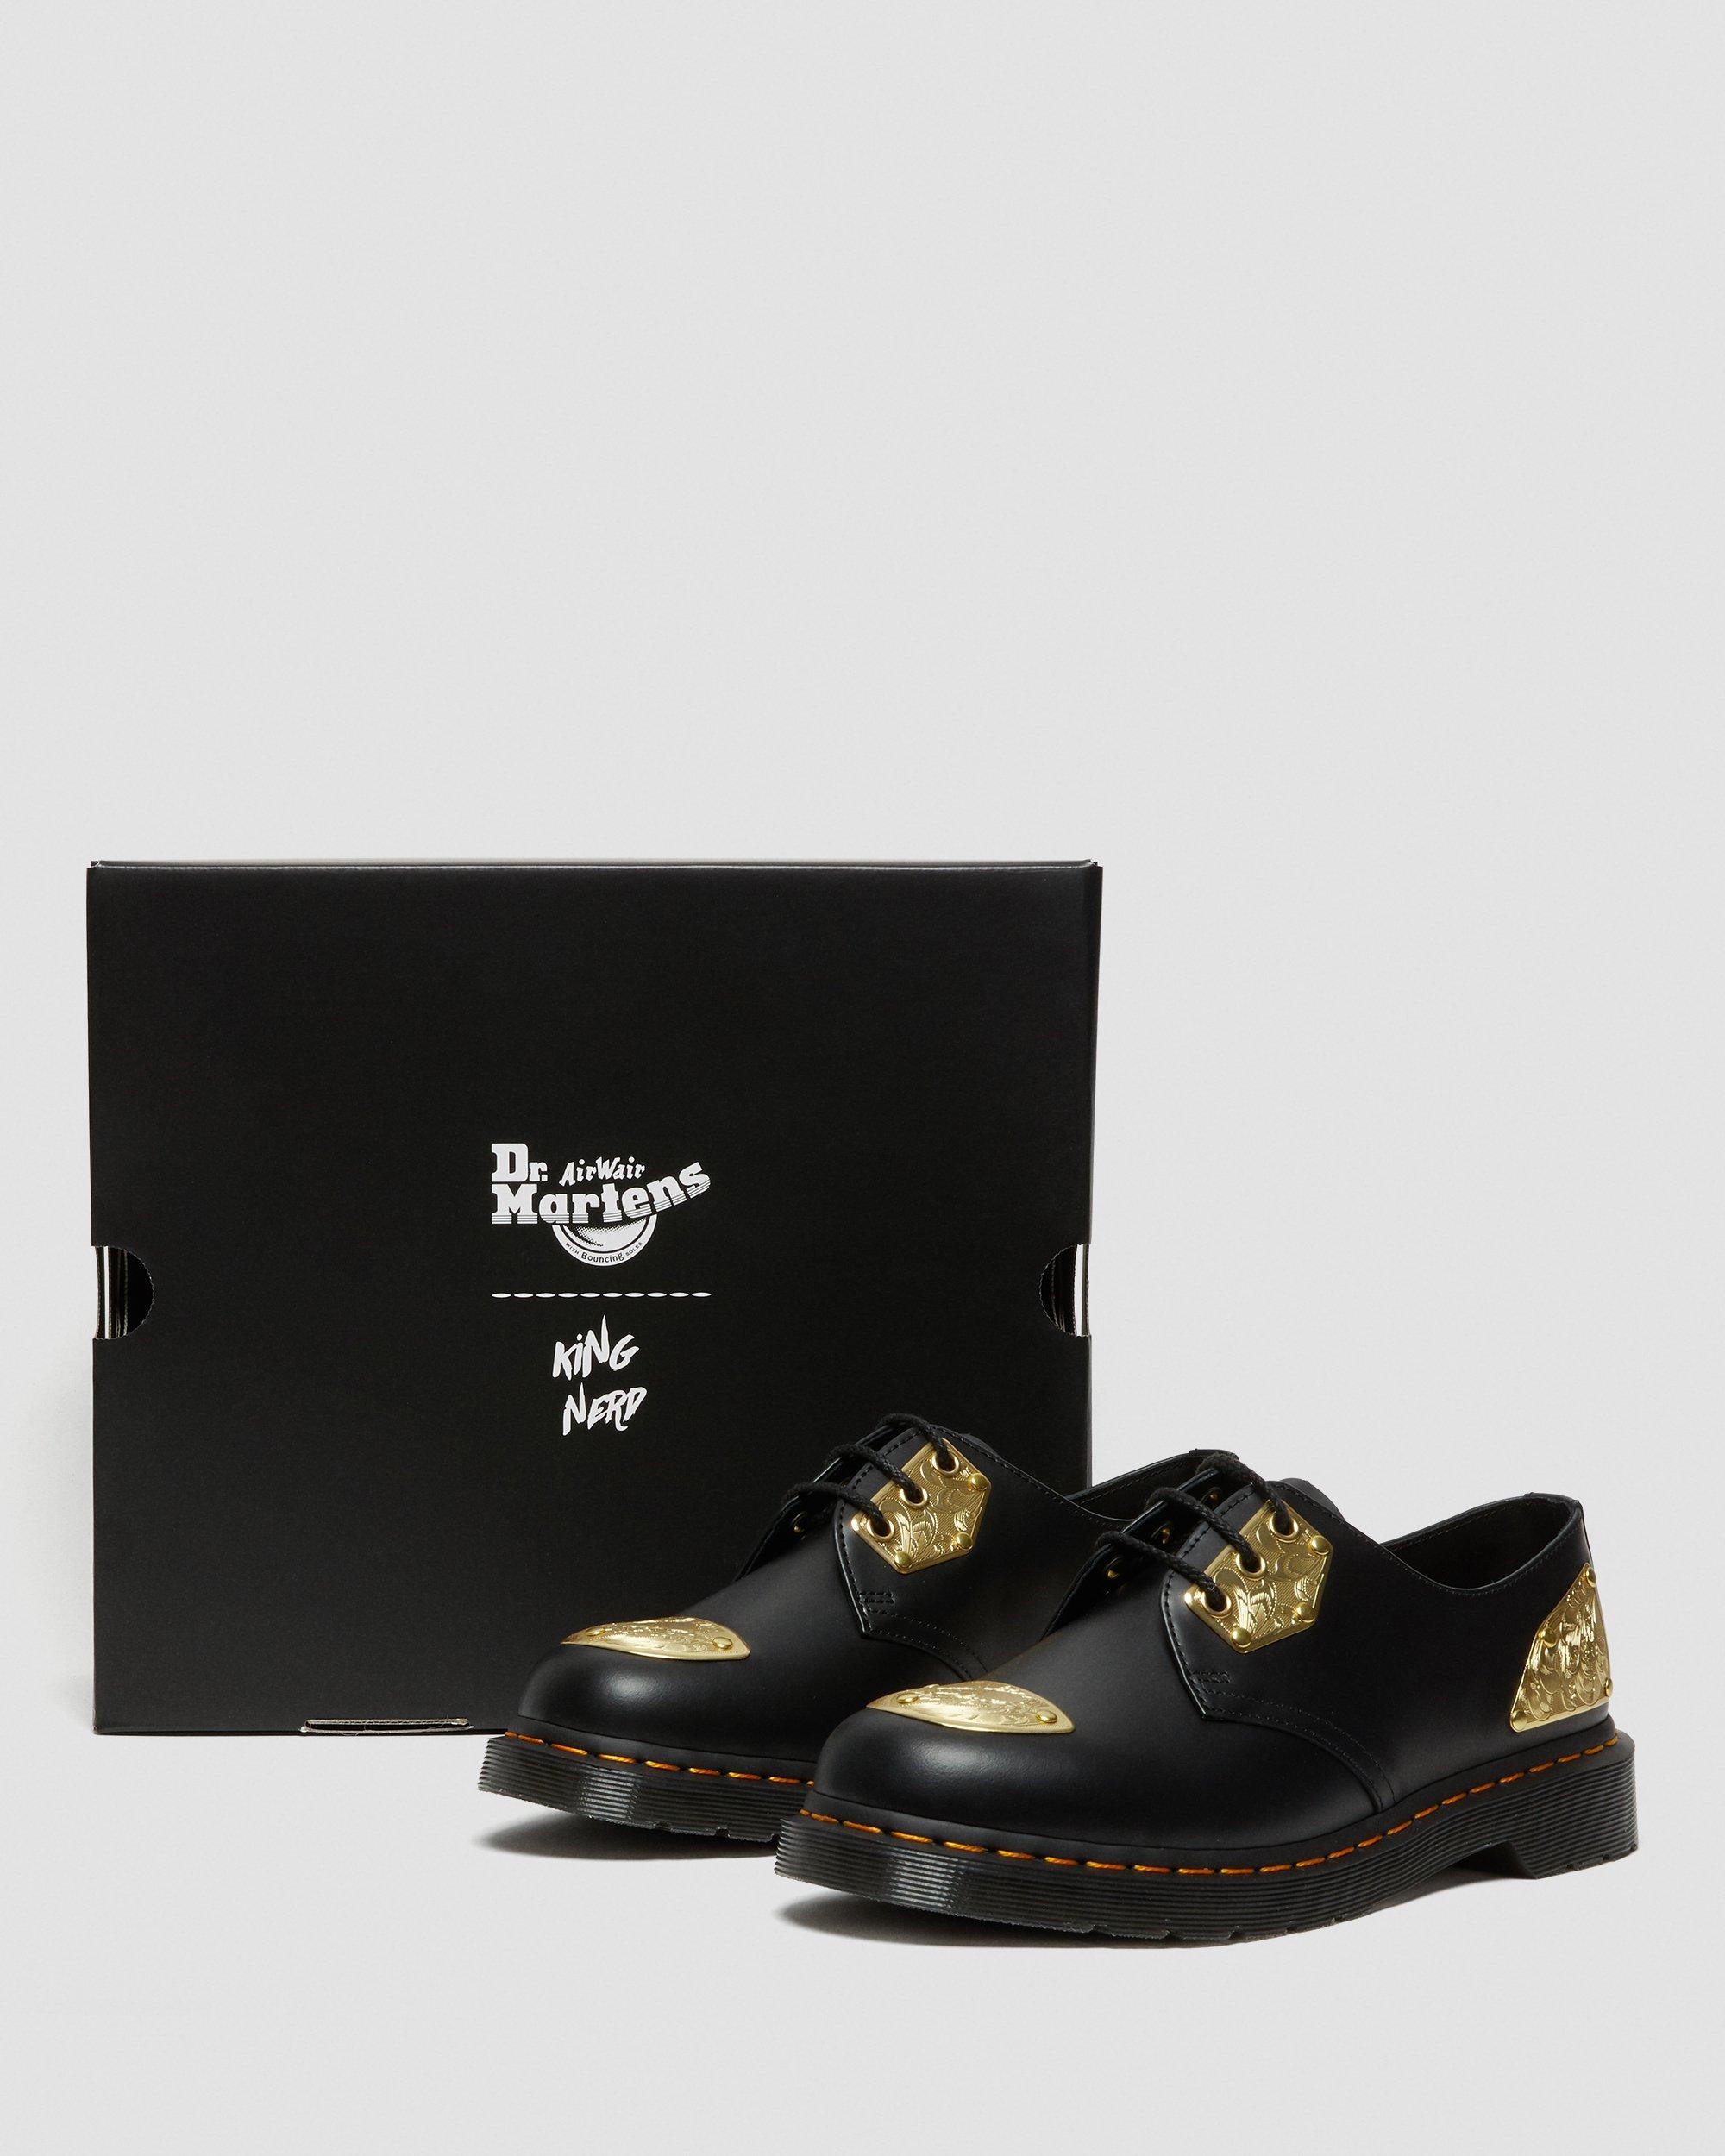 King Nerd 1461 Leather Oxford Shoes | Dr. Martens